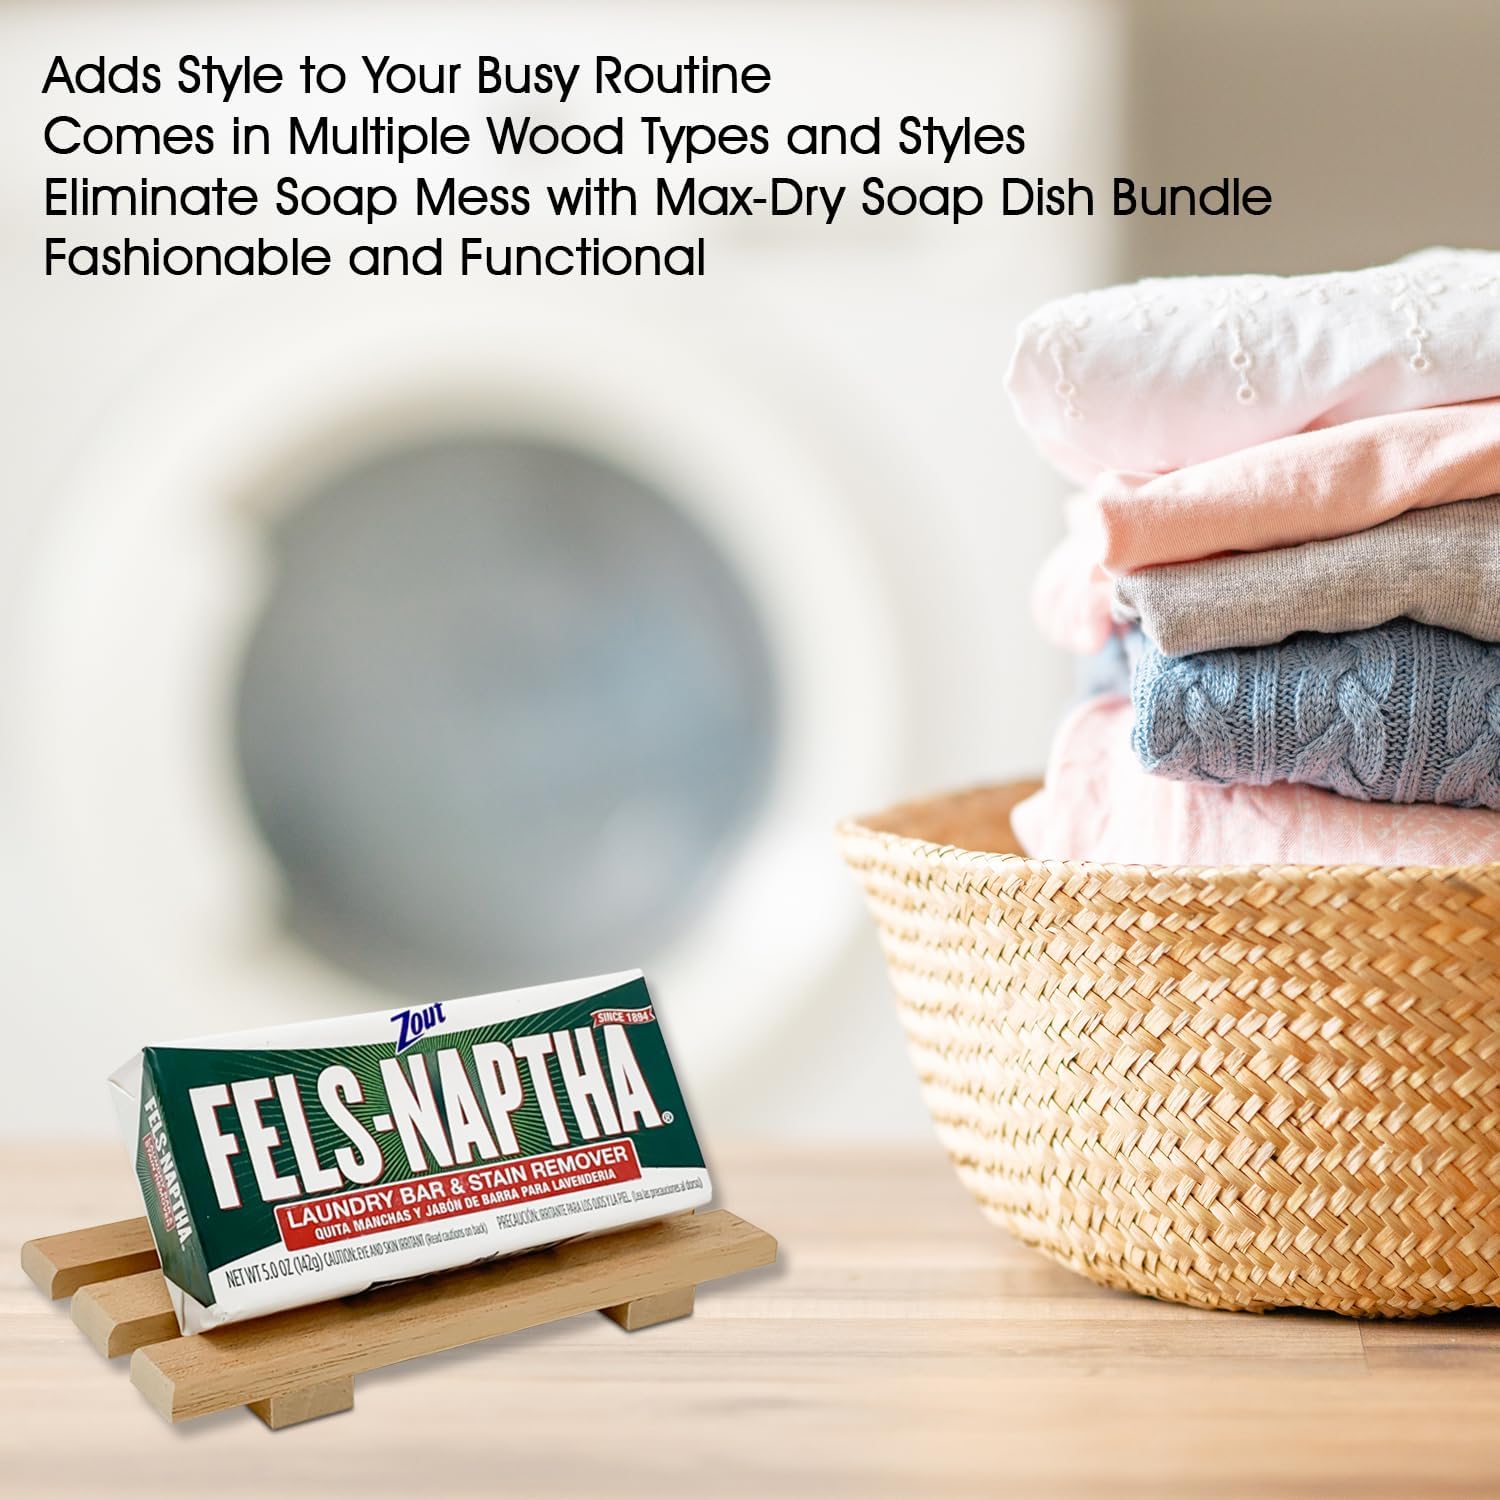 Fels Naptha Laundry Detergent Bar - 5 Ounce Fels Naptha Laundry Bar Soap and Stain Remover Bundle (Craftsman Style) - Get the Ultimate Accessory to your Fels Naptha Soap Bars. : Health & Household